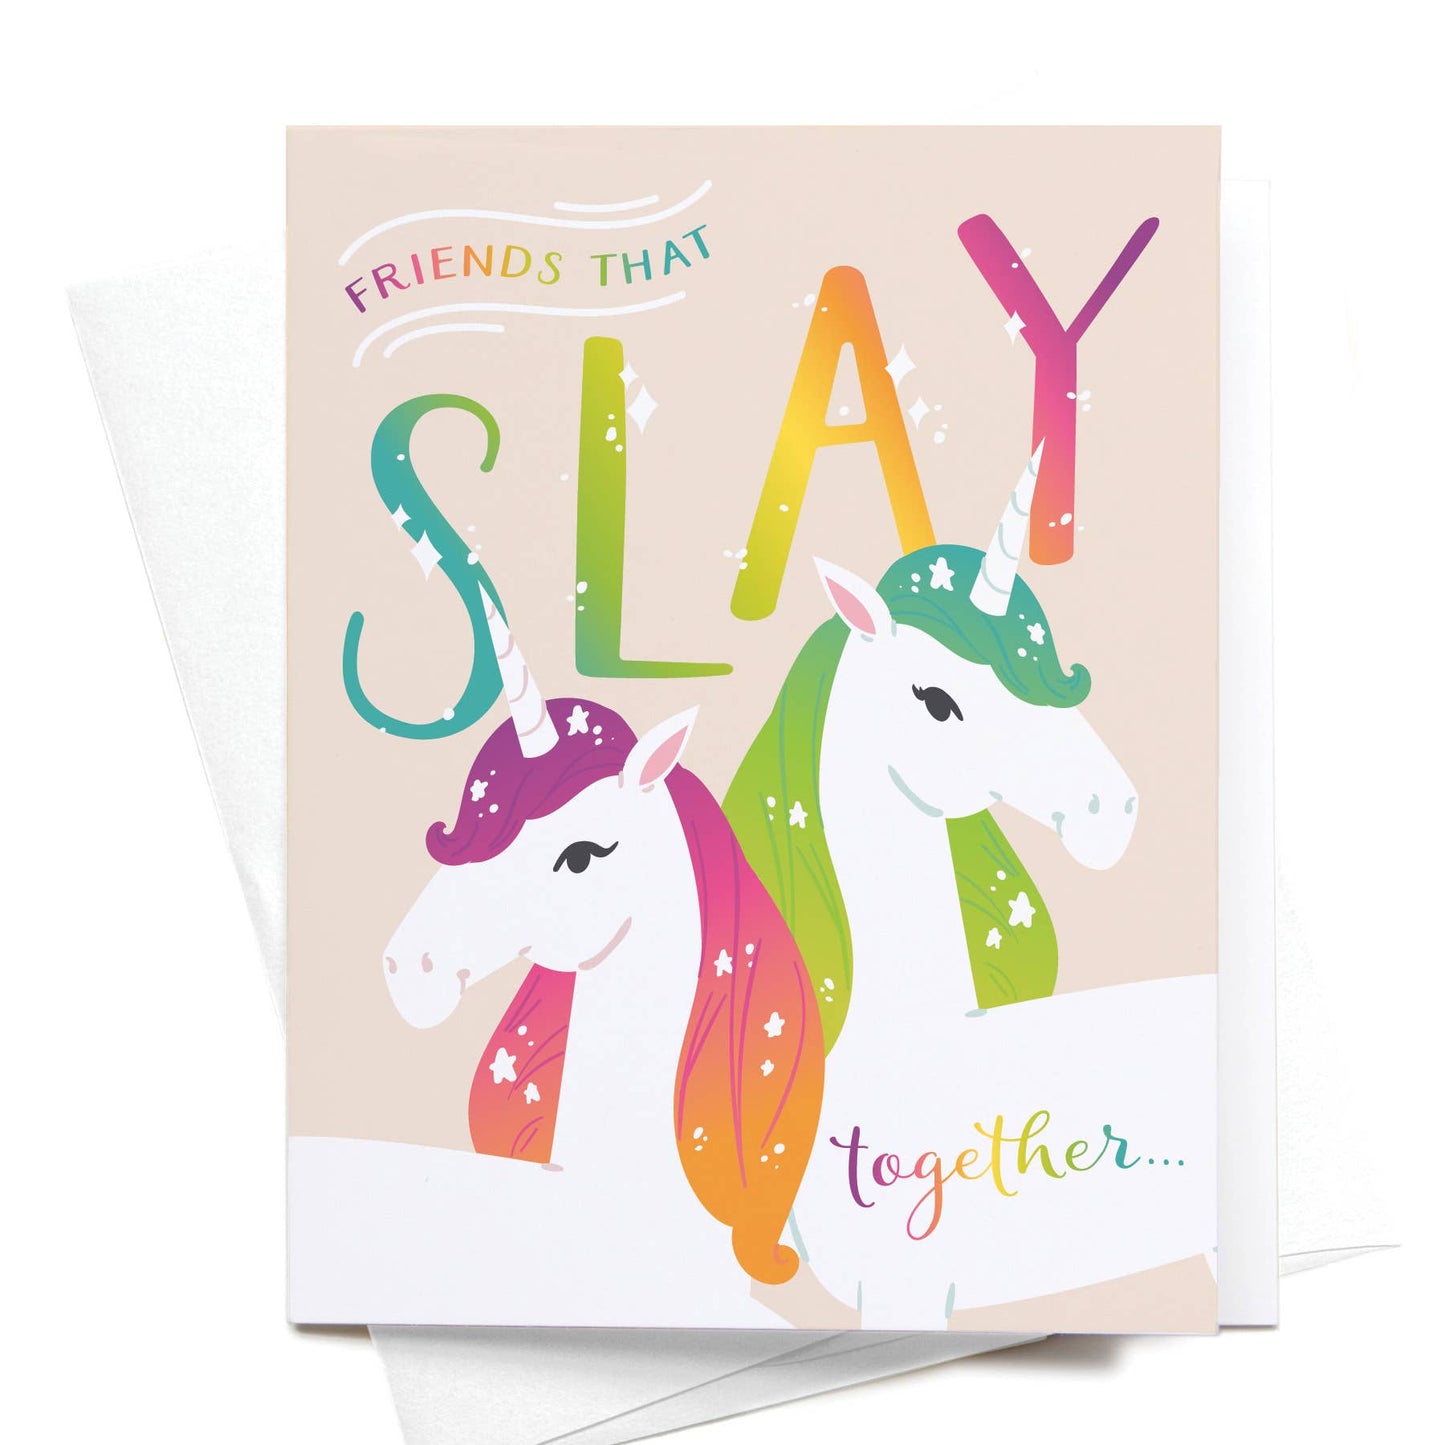 "Friends That Slay Together" Greeting Card